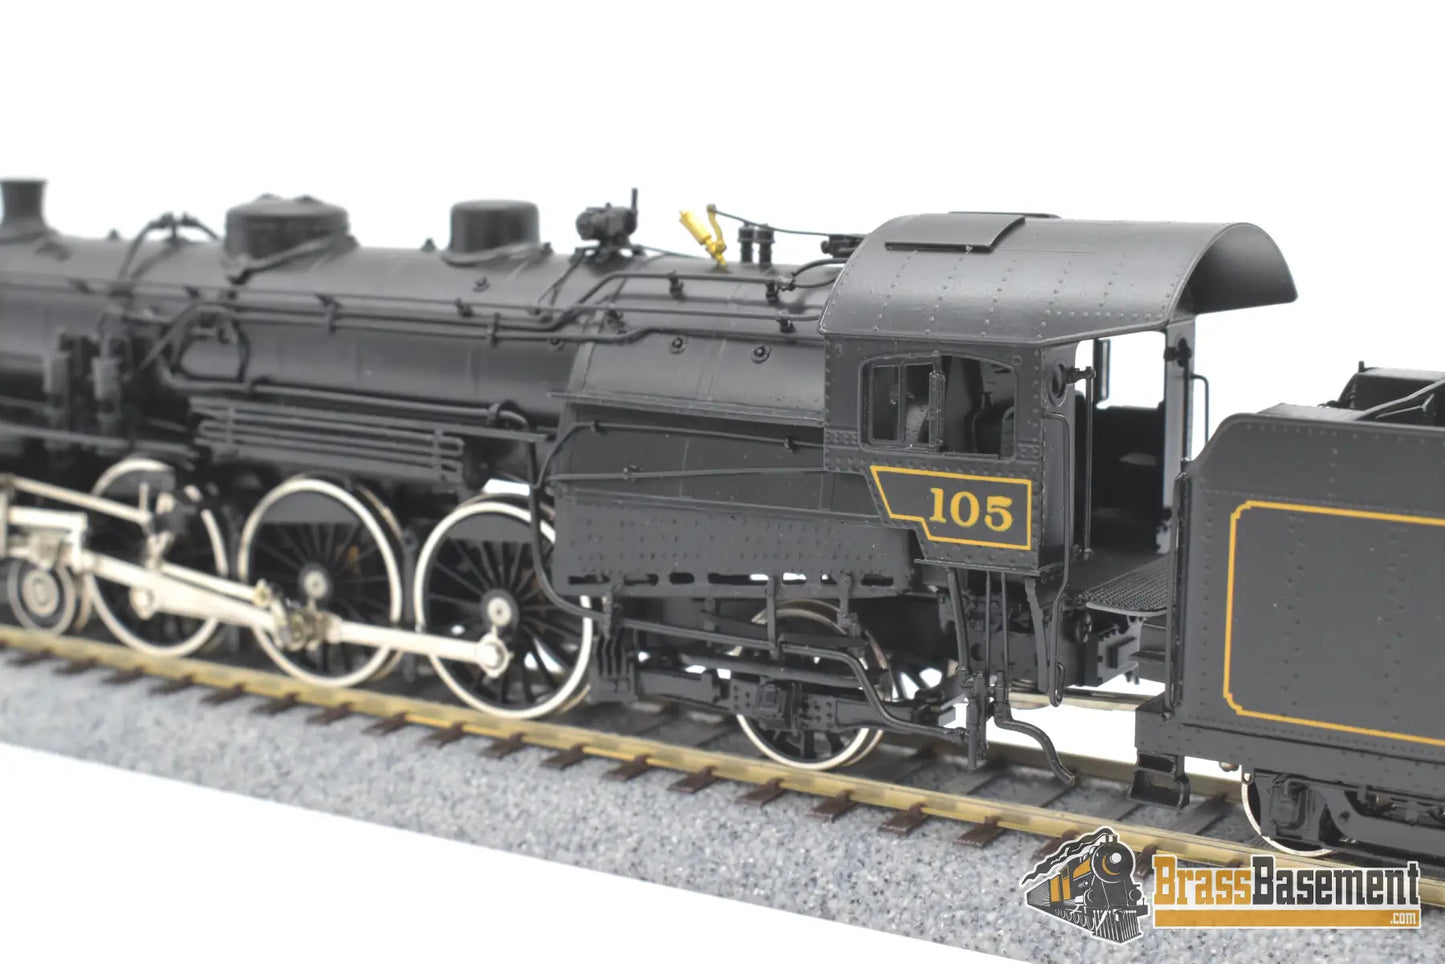 Ho Brass - Omi 1565.1 Reading 4 - 6 - 2 Pacific G1Sa Unstreamlined #105 Fp Steam